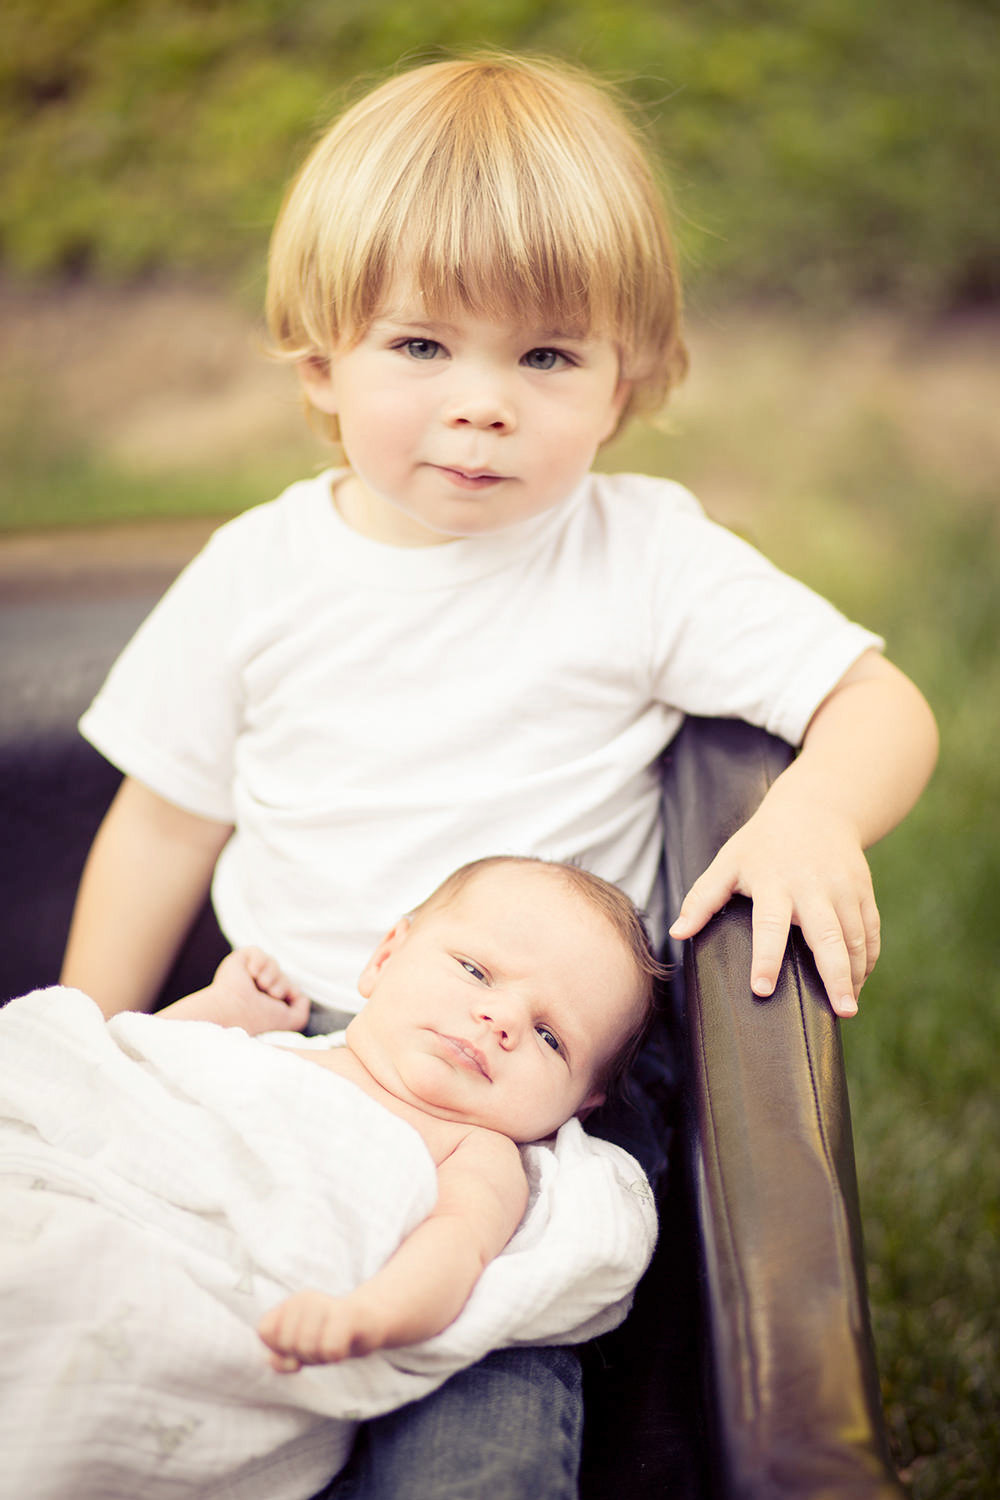 san diego family photographer | boy with newborn sister in a wicker basket